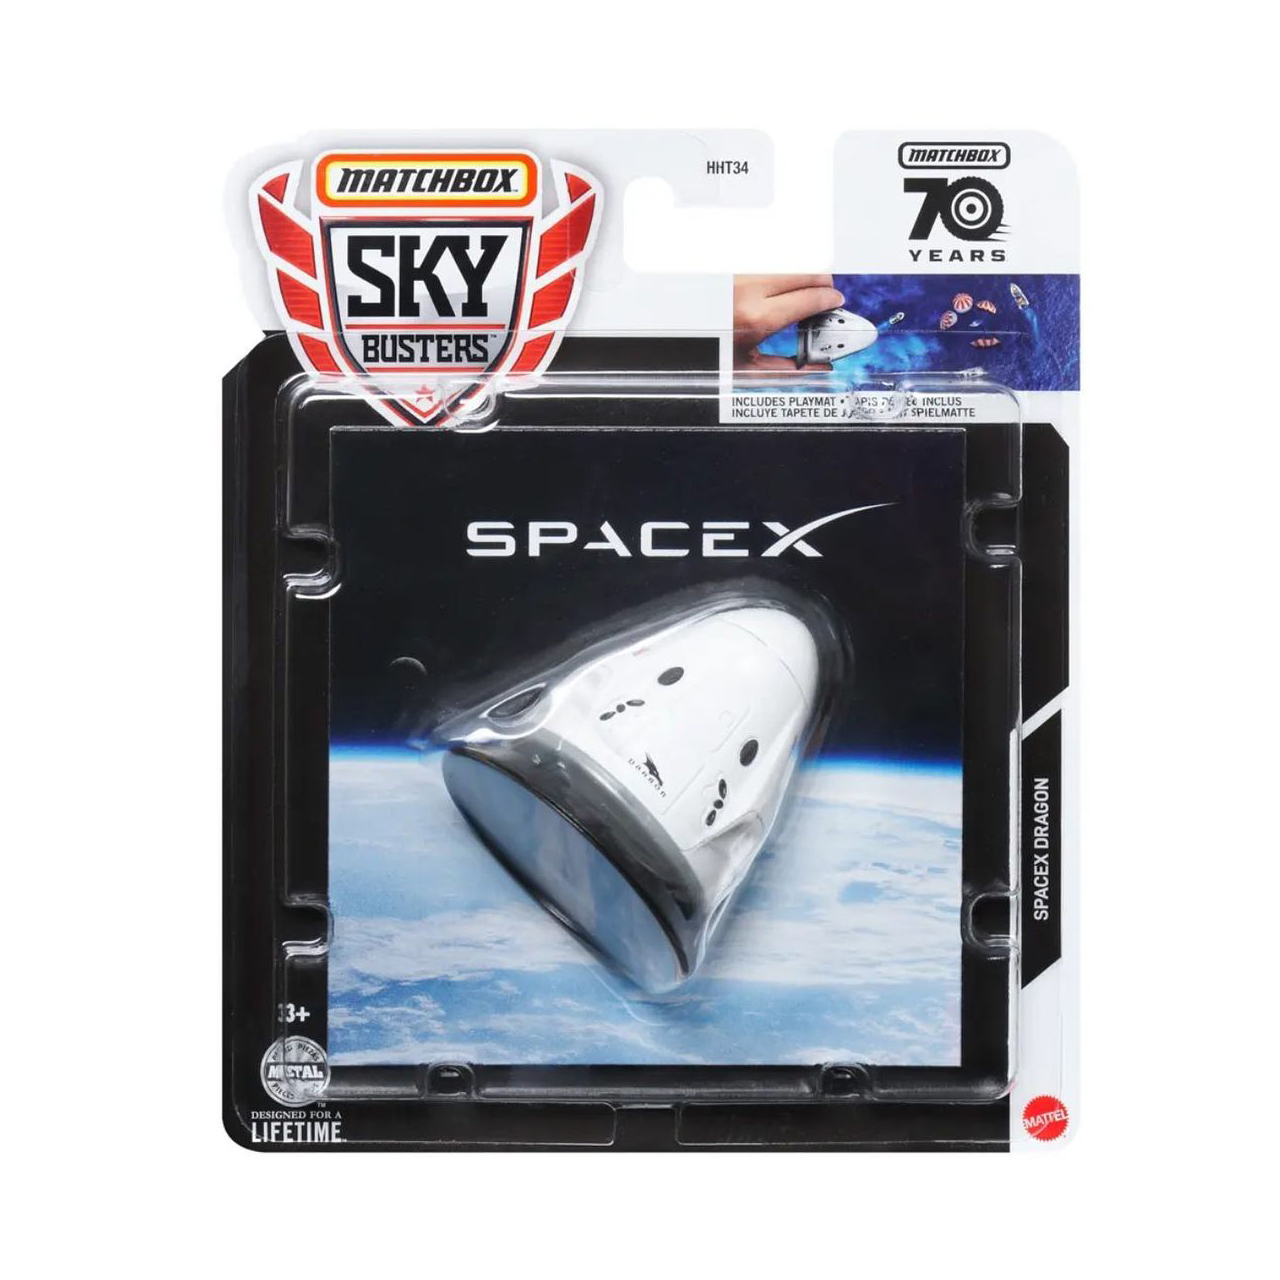 Mattel's Matchbox Sky Busters line now includes a die-cast model of SpaceX Dragon descent capsule.